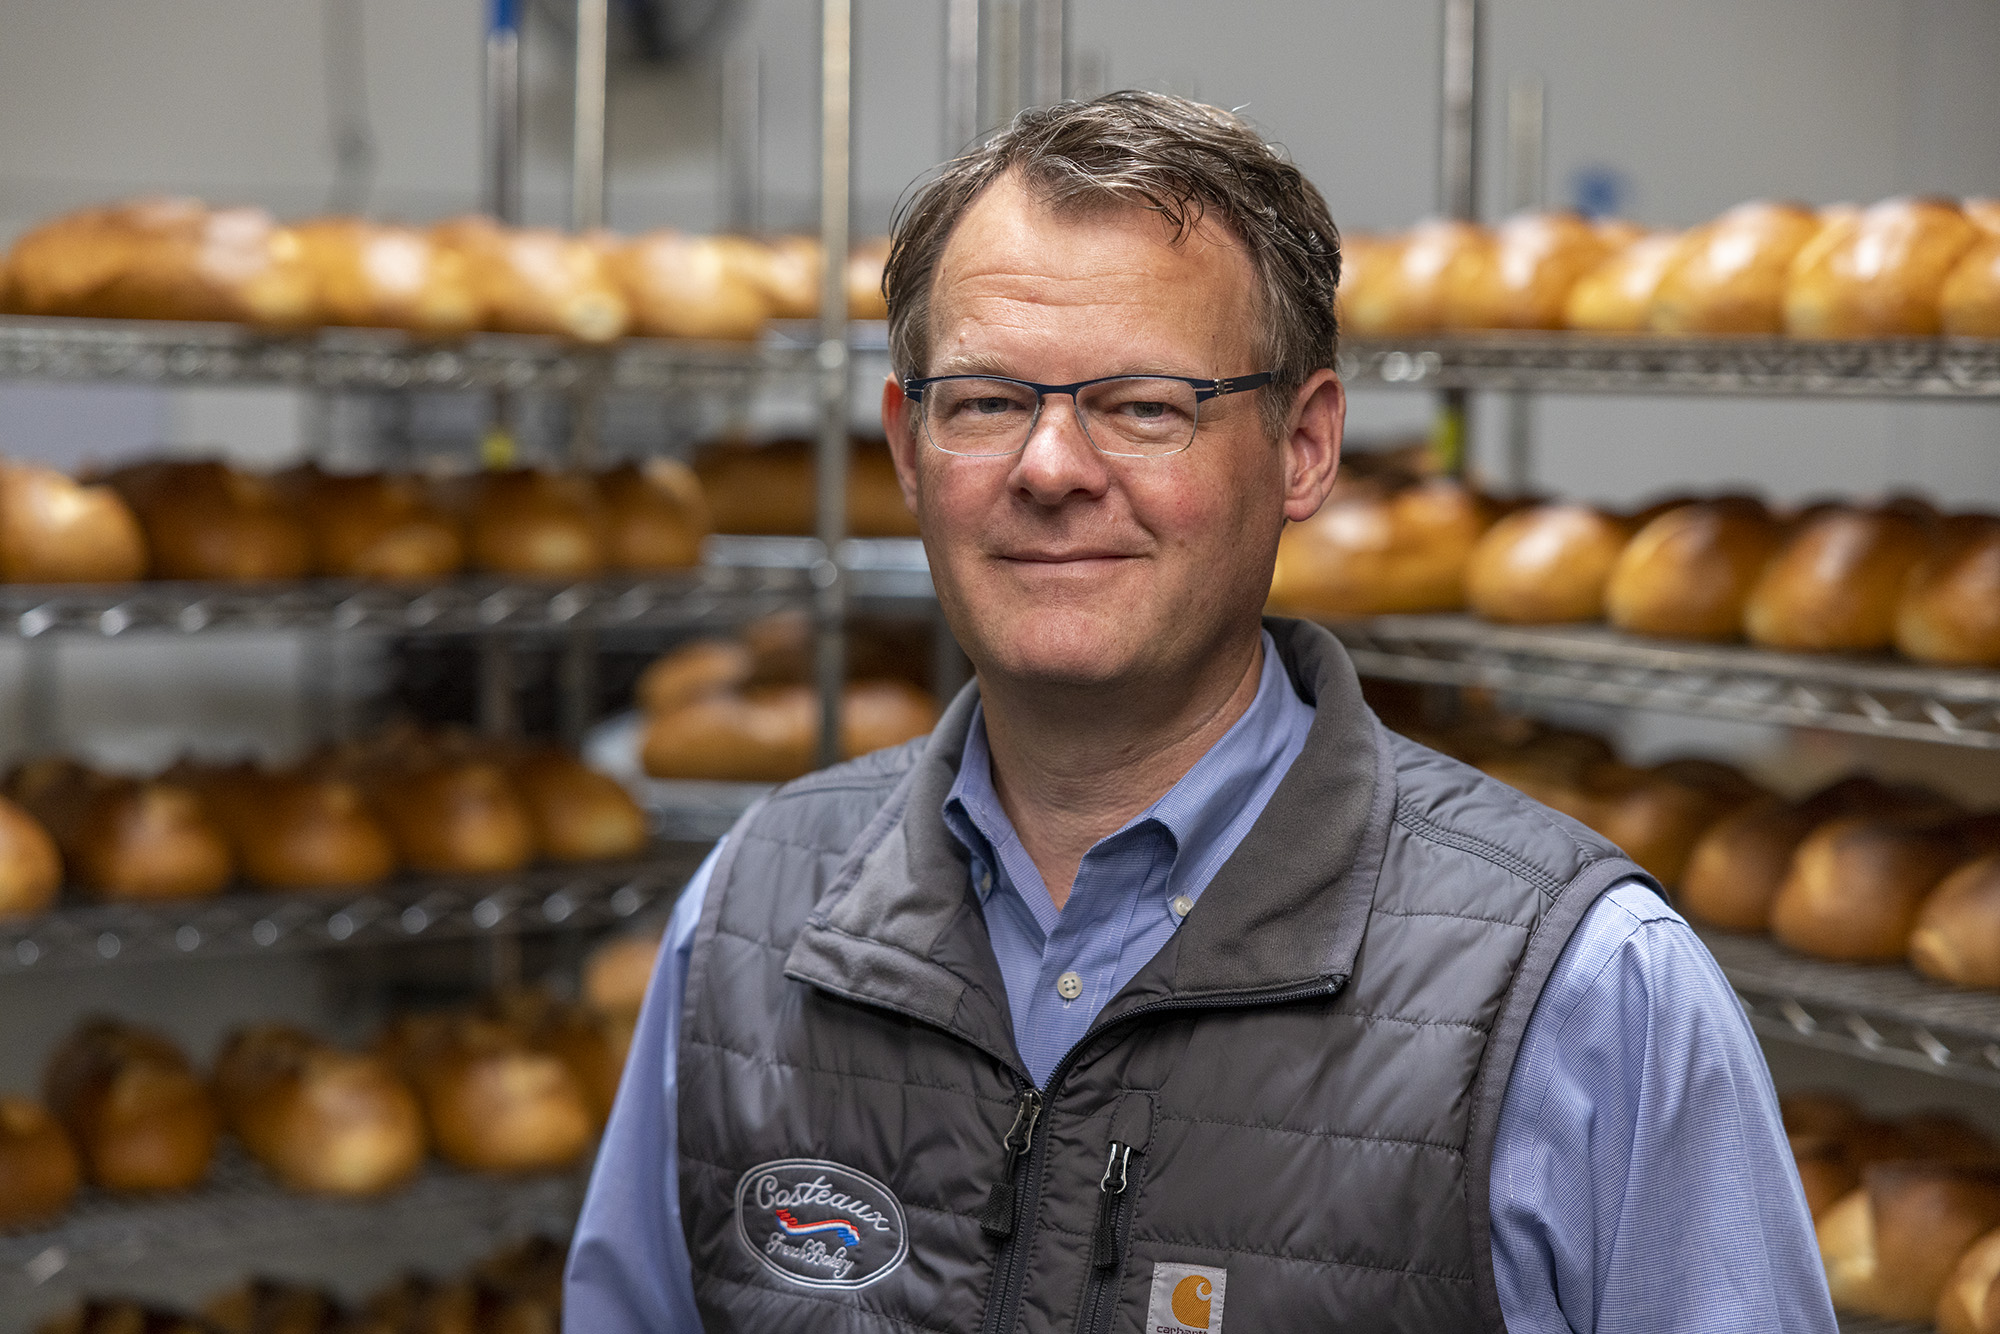 Costeaux French Bakery owner, Will Seppi, posing for camera, surrounded by fresh baked bread.